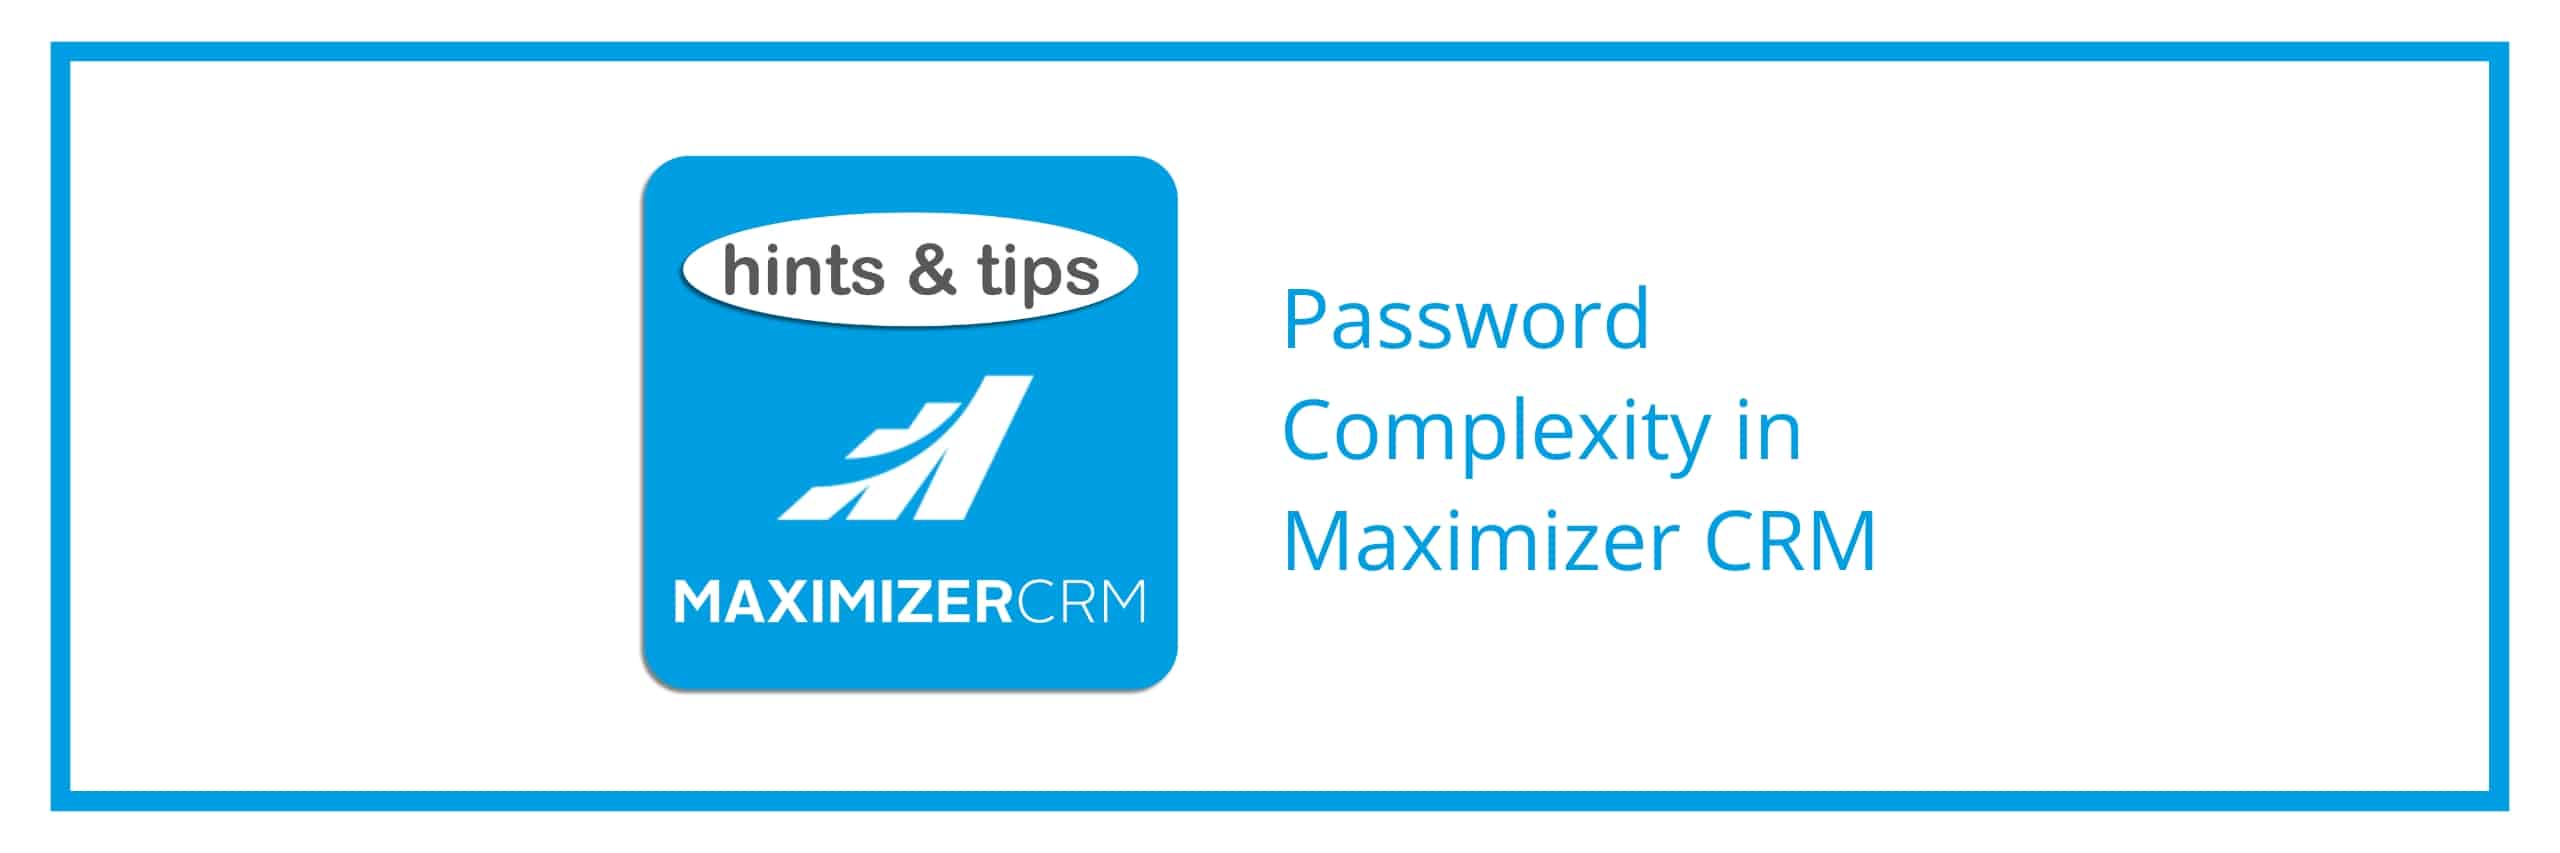 Hints & Tips - Password Complexity in Maximizer CRM